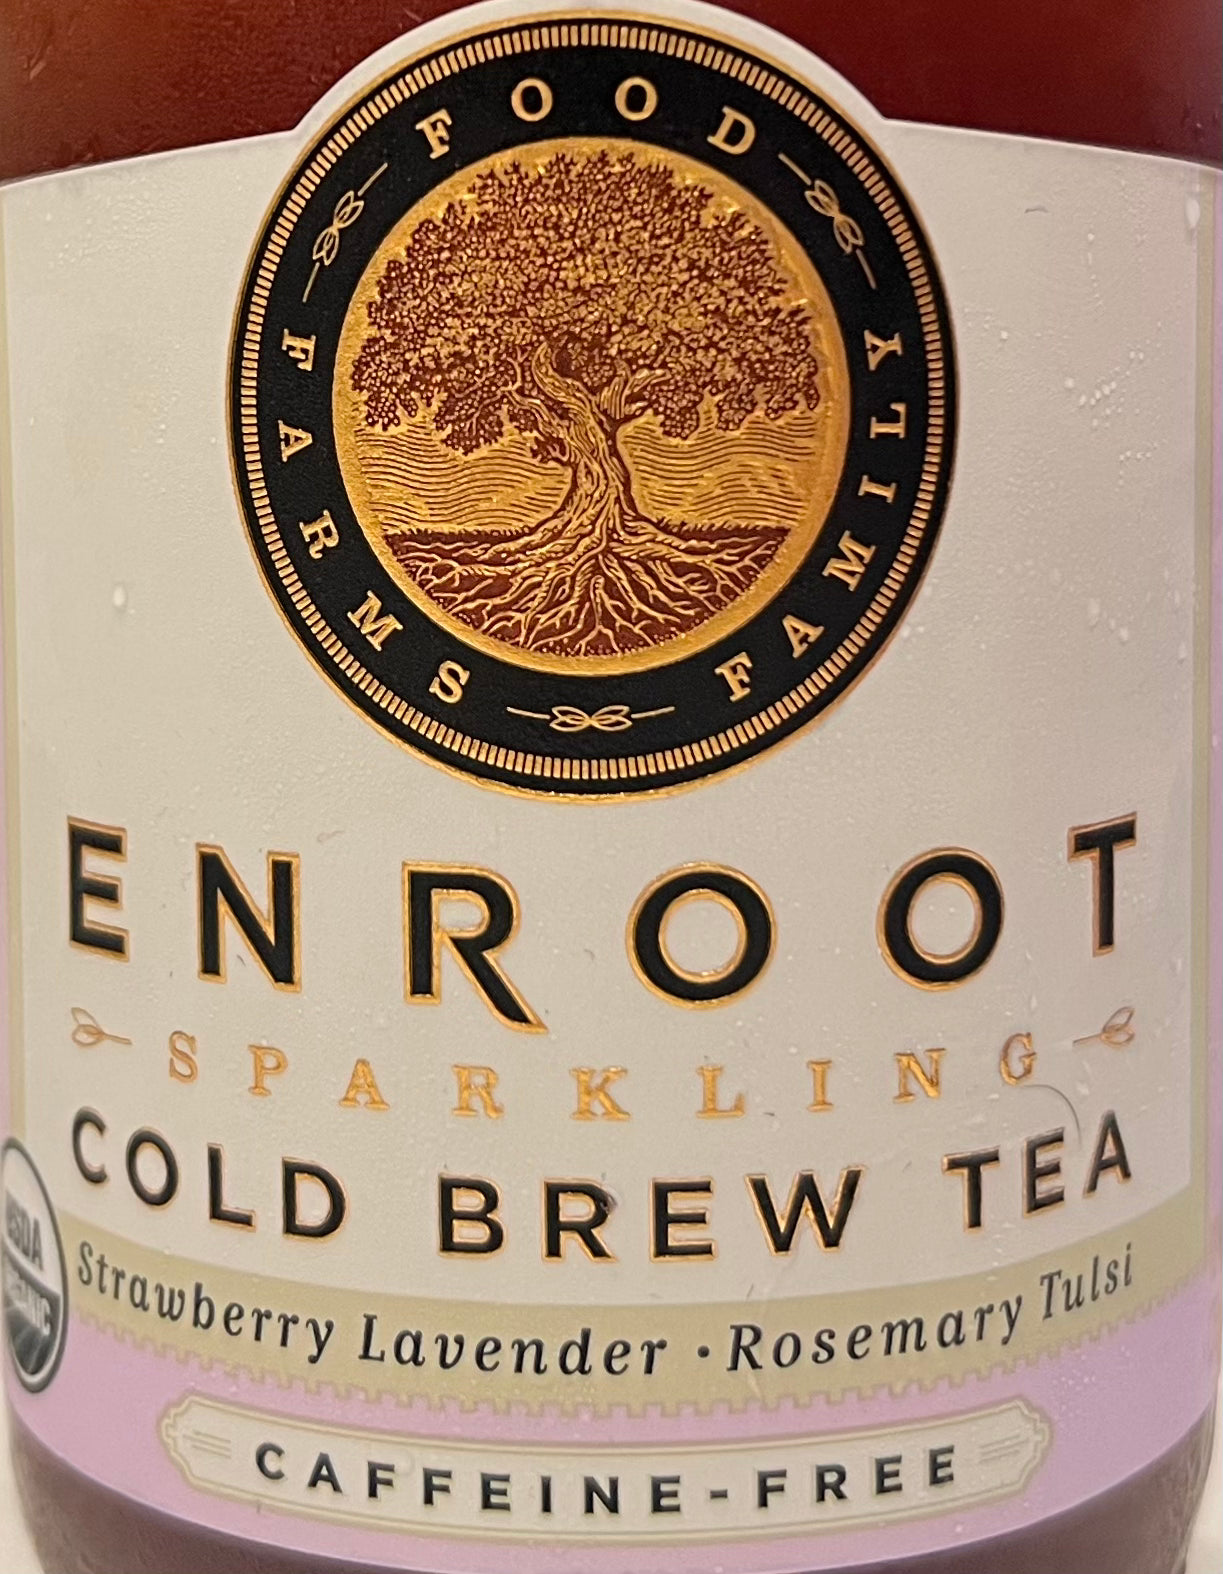 Enroot - Cold Brew Tea - Strawberry Lavender Tulsi - 6 pack